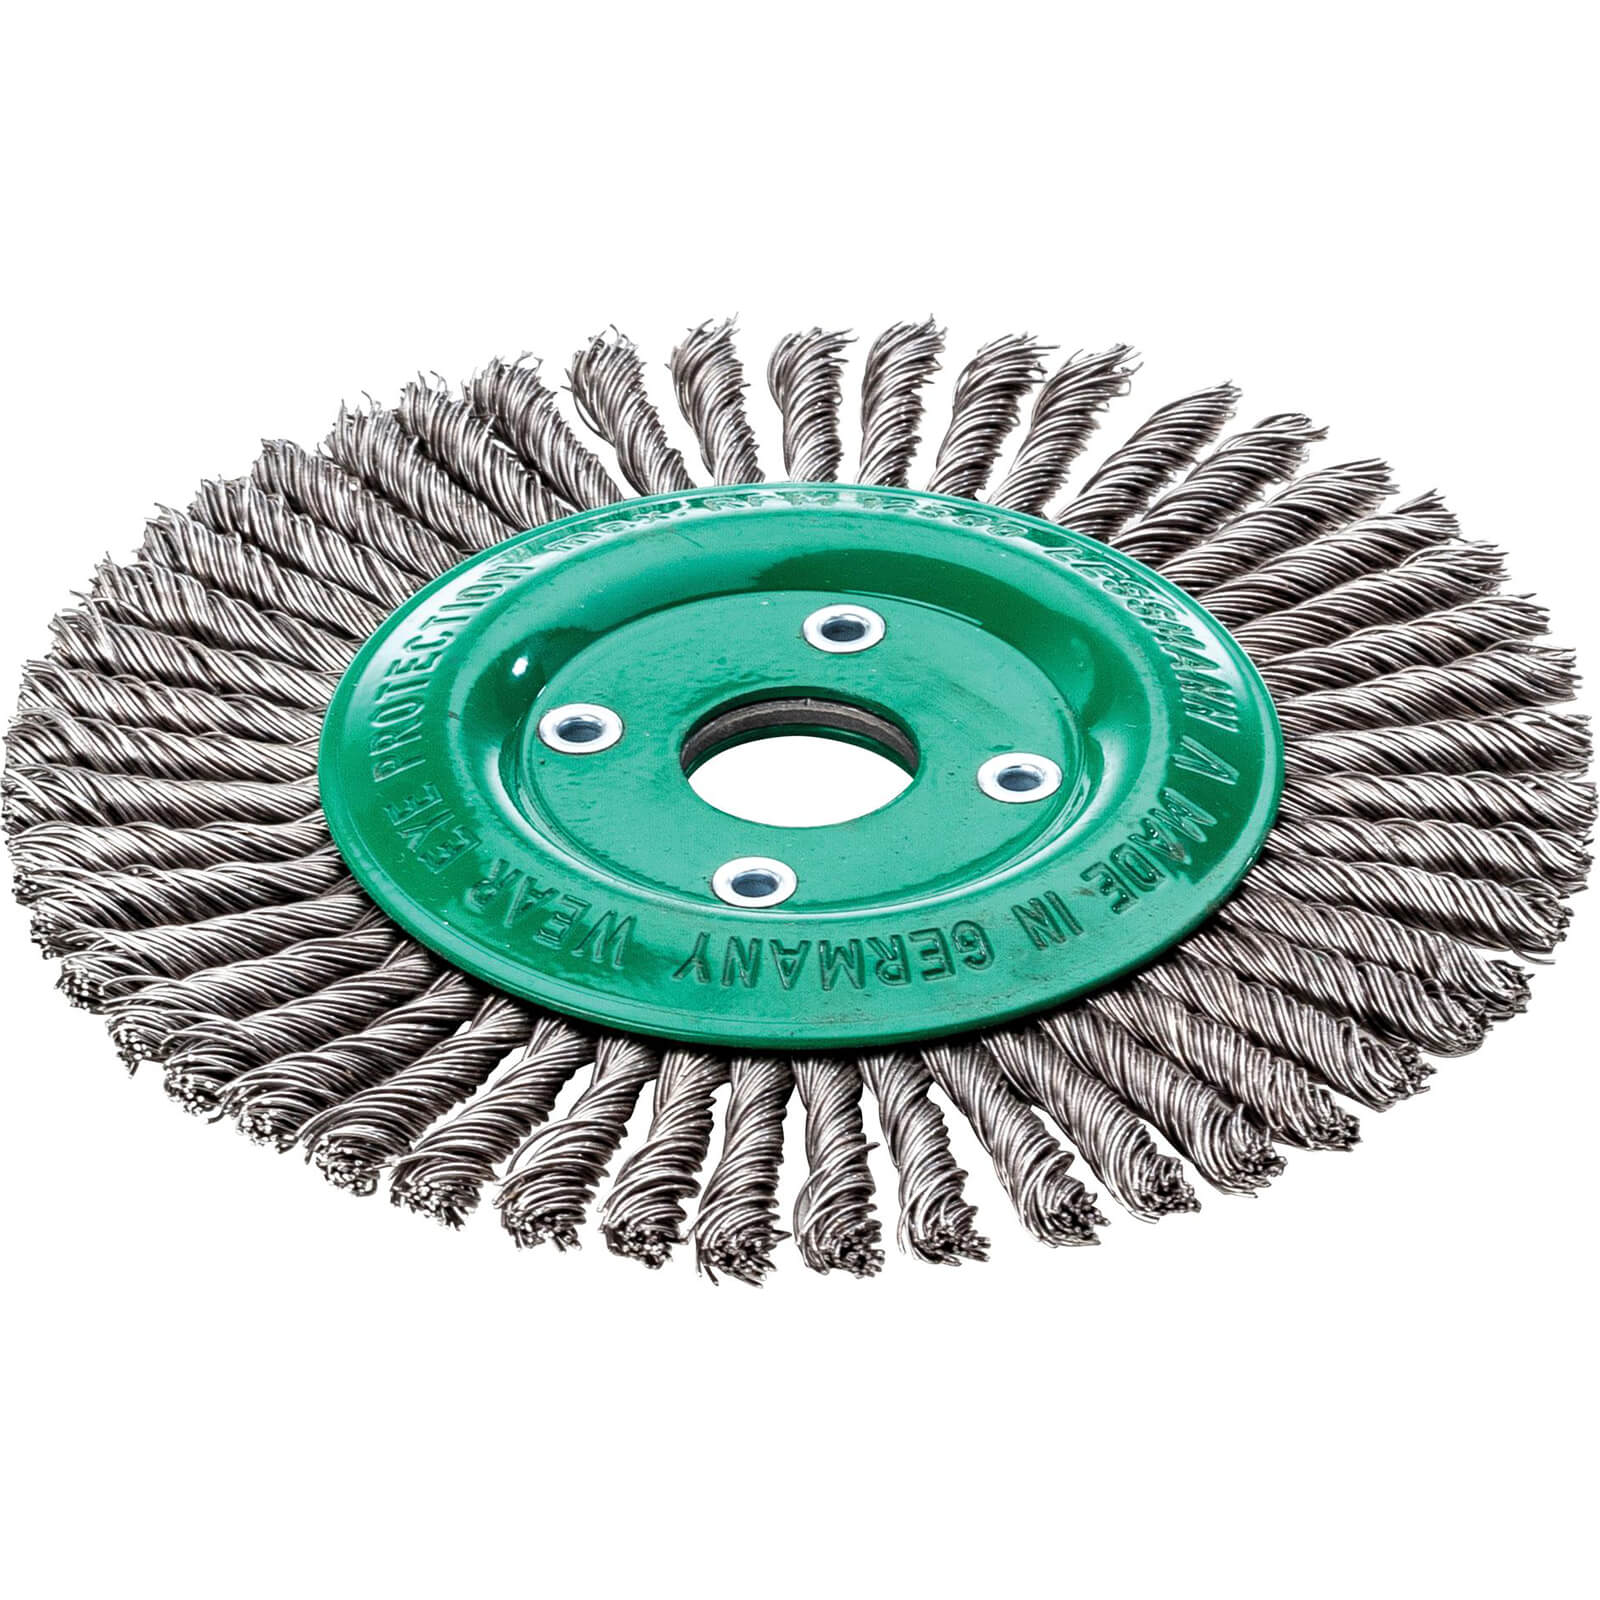 Photo of Lessmann Pipeline Stainless Steel Wire Wheel Brush 125mm 22.2mm Bore